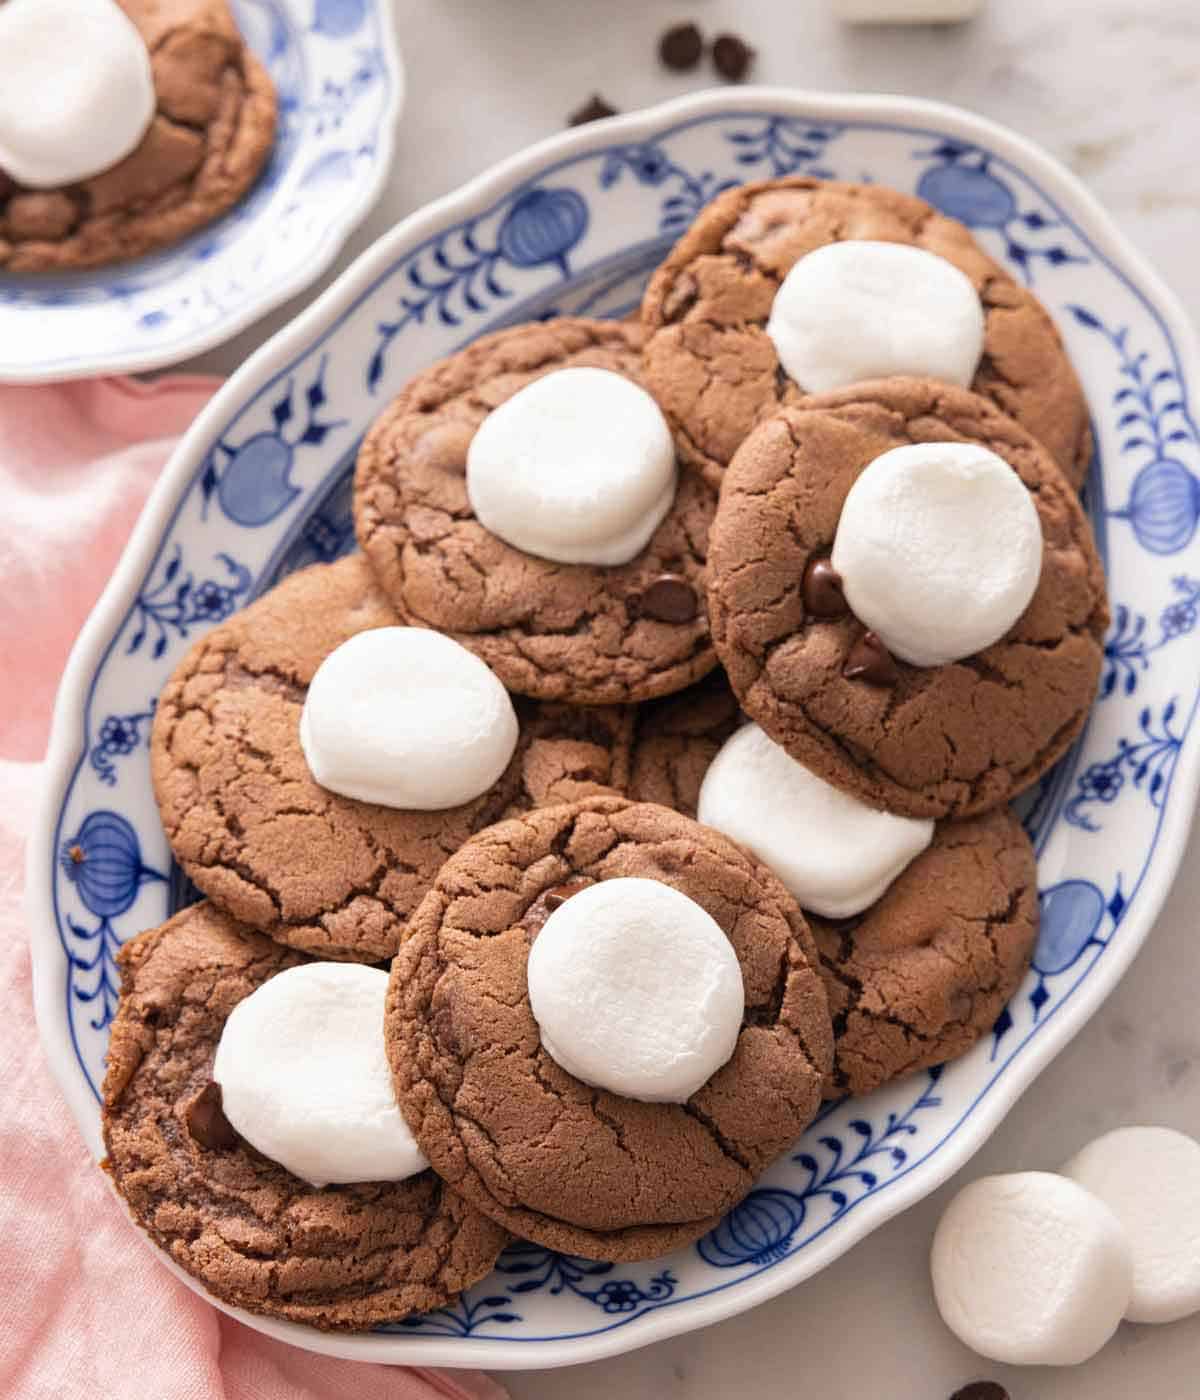 A platter with multiple hot chocolate cookies with marshmallows and chocolate chips scattered around.